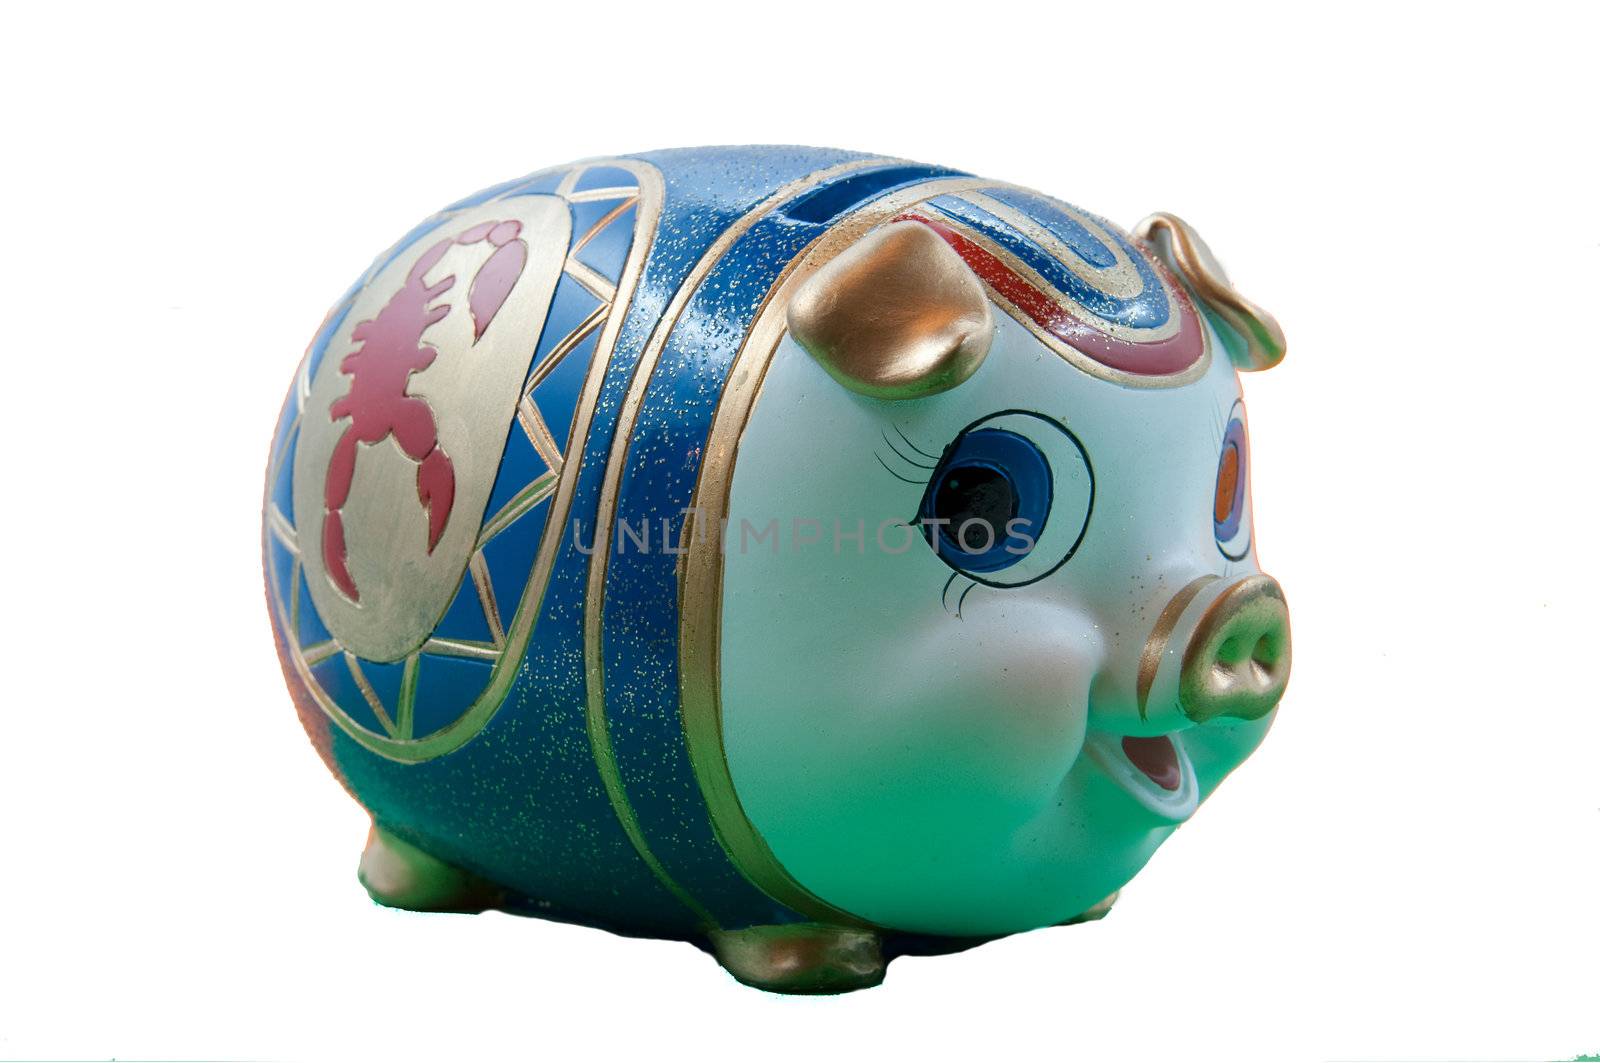 the picture of the pig money box